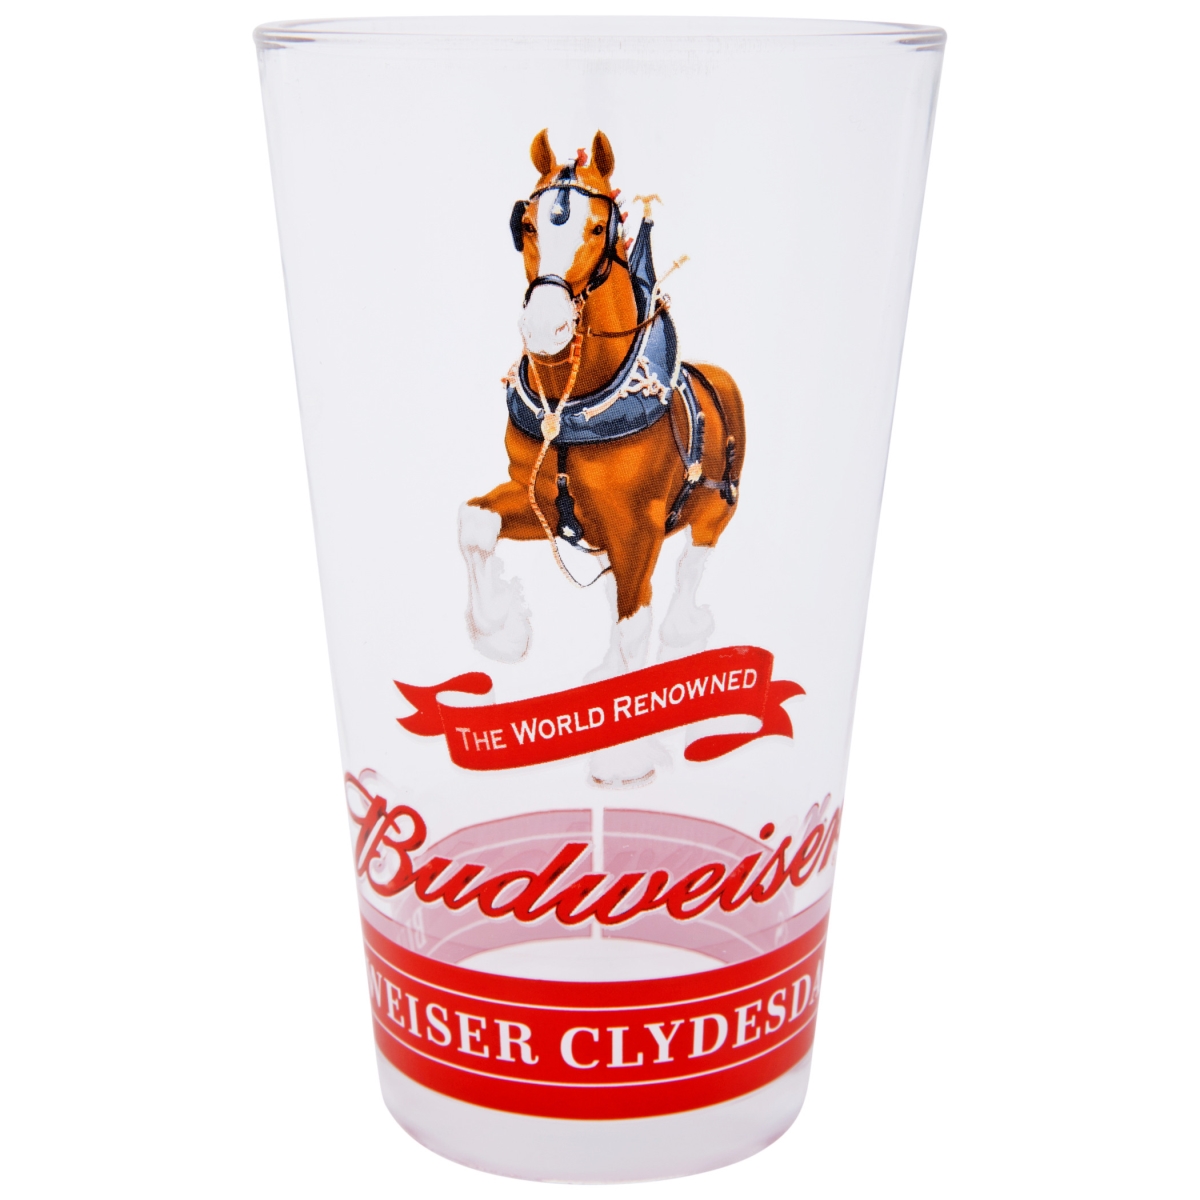 Picture of Budweiser 851539 Budweiser Clydesdales White Label Pint Glass